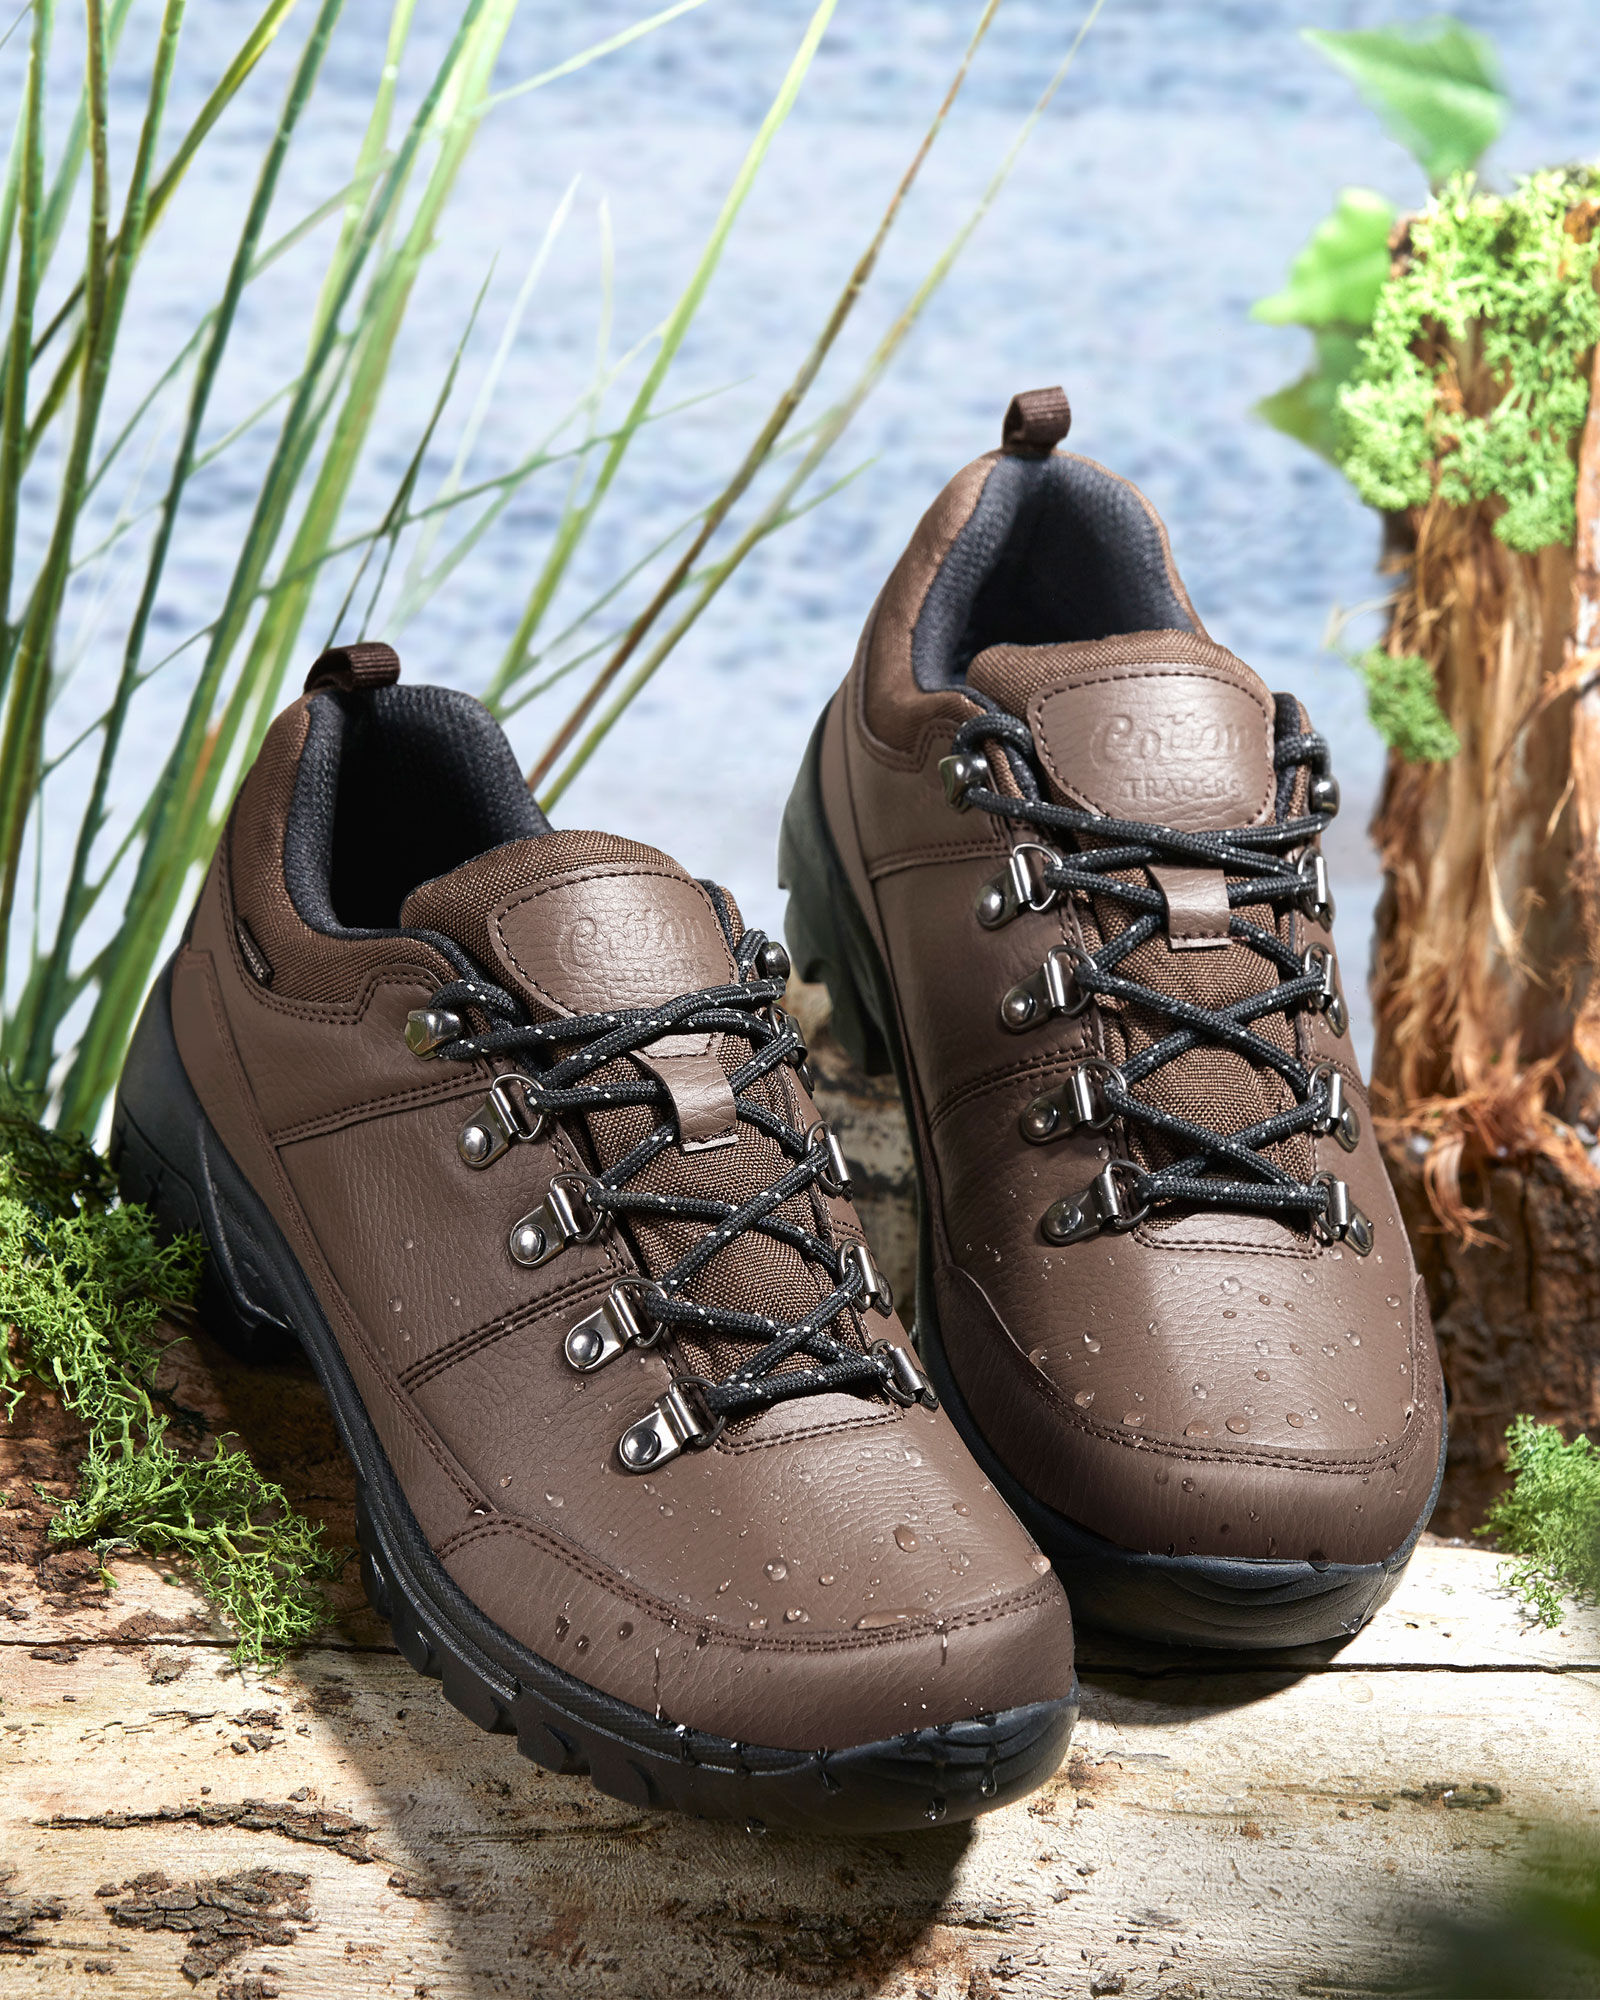 cotton traders lightweight walking shoes